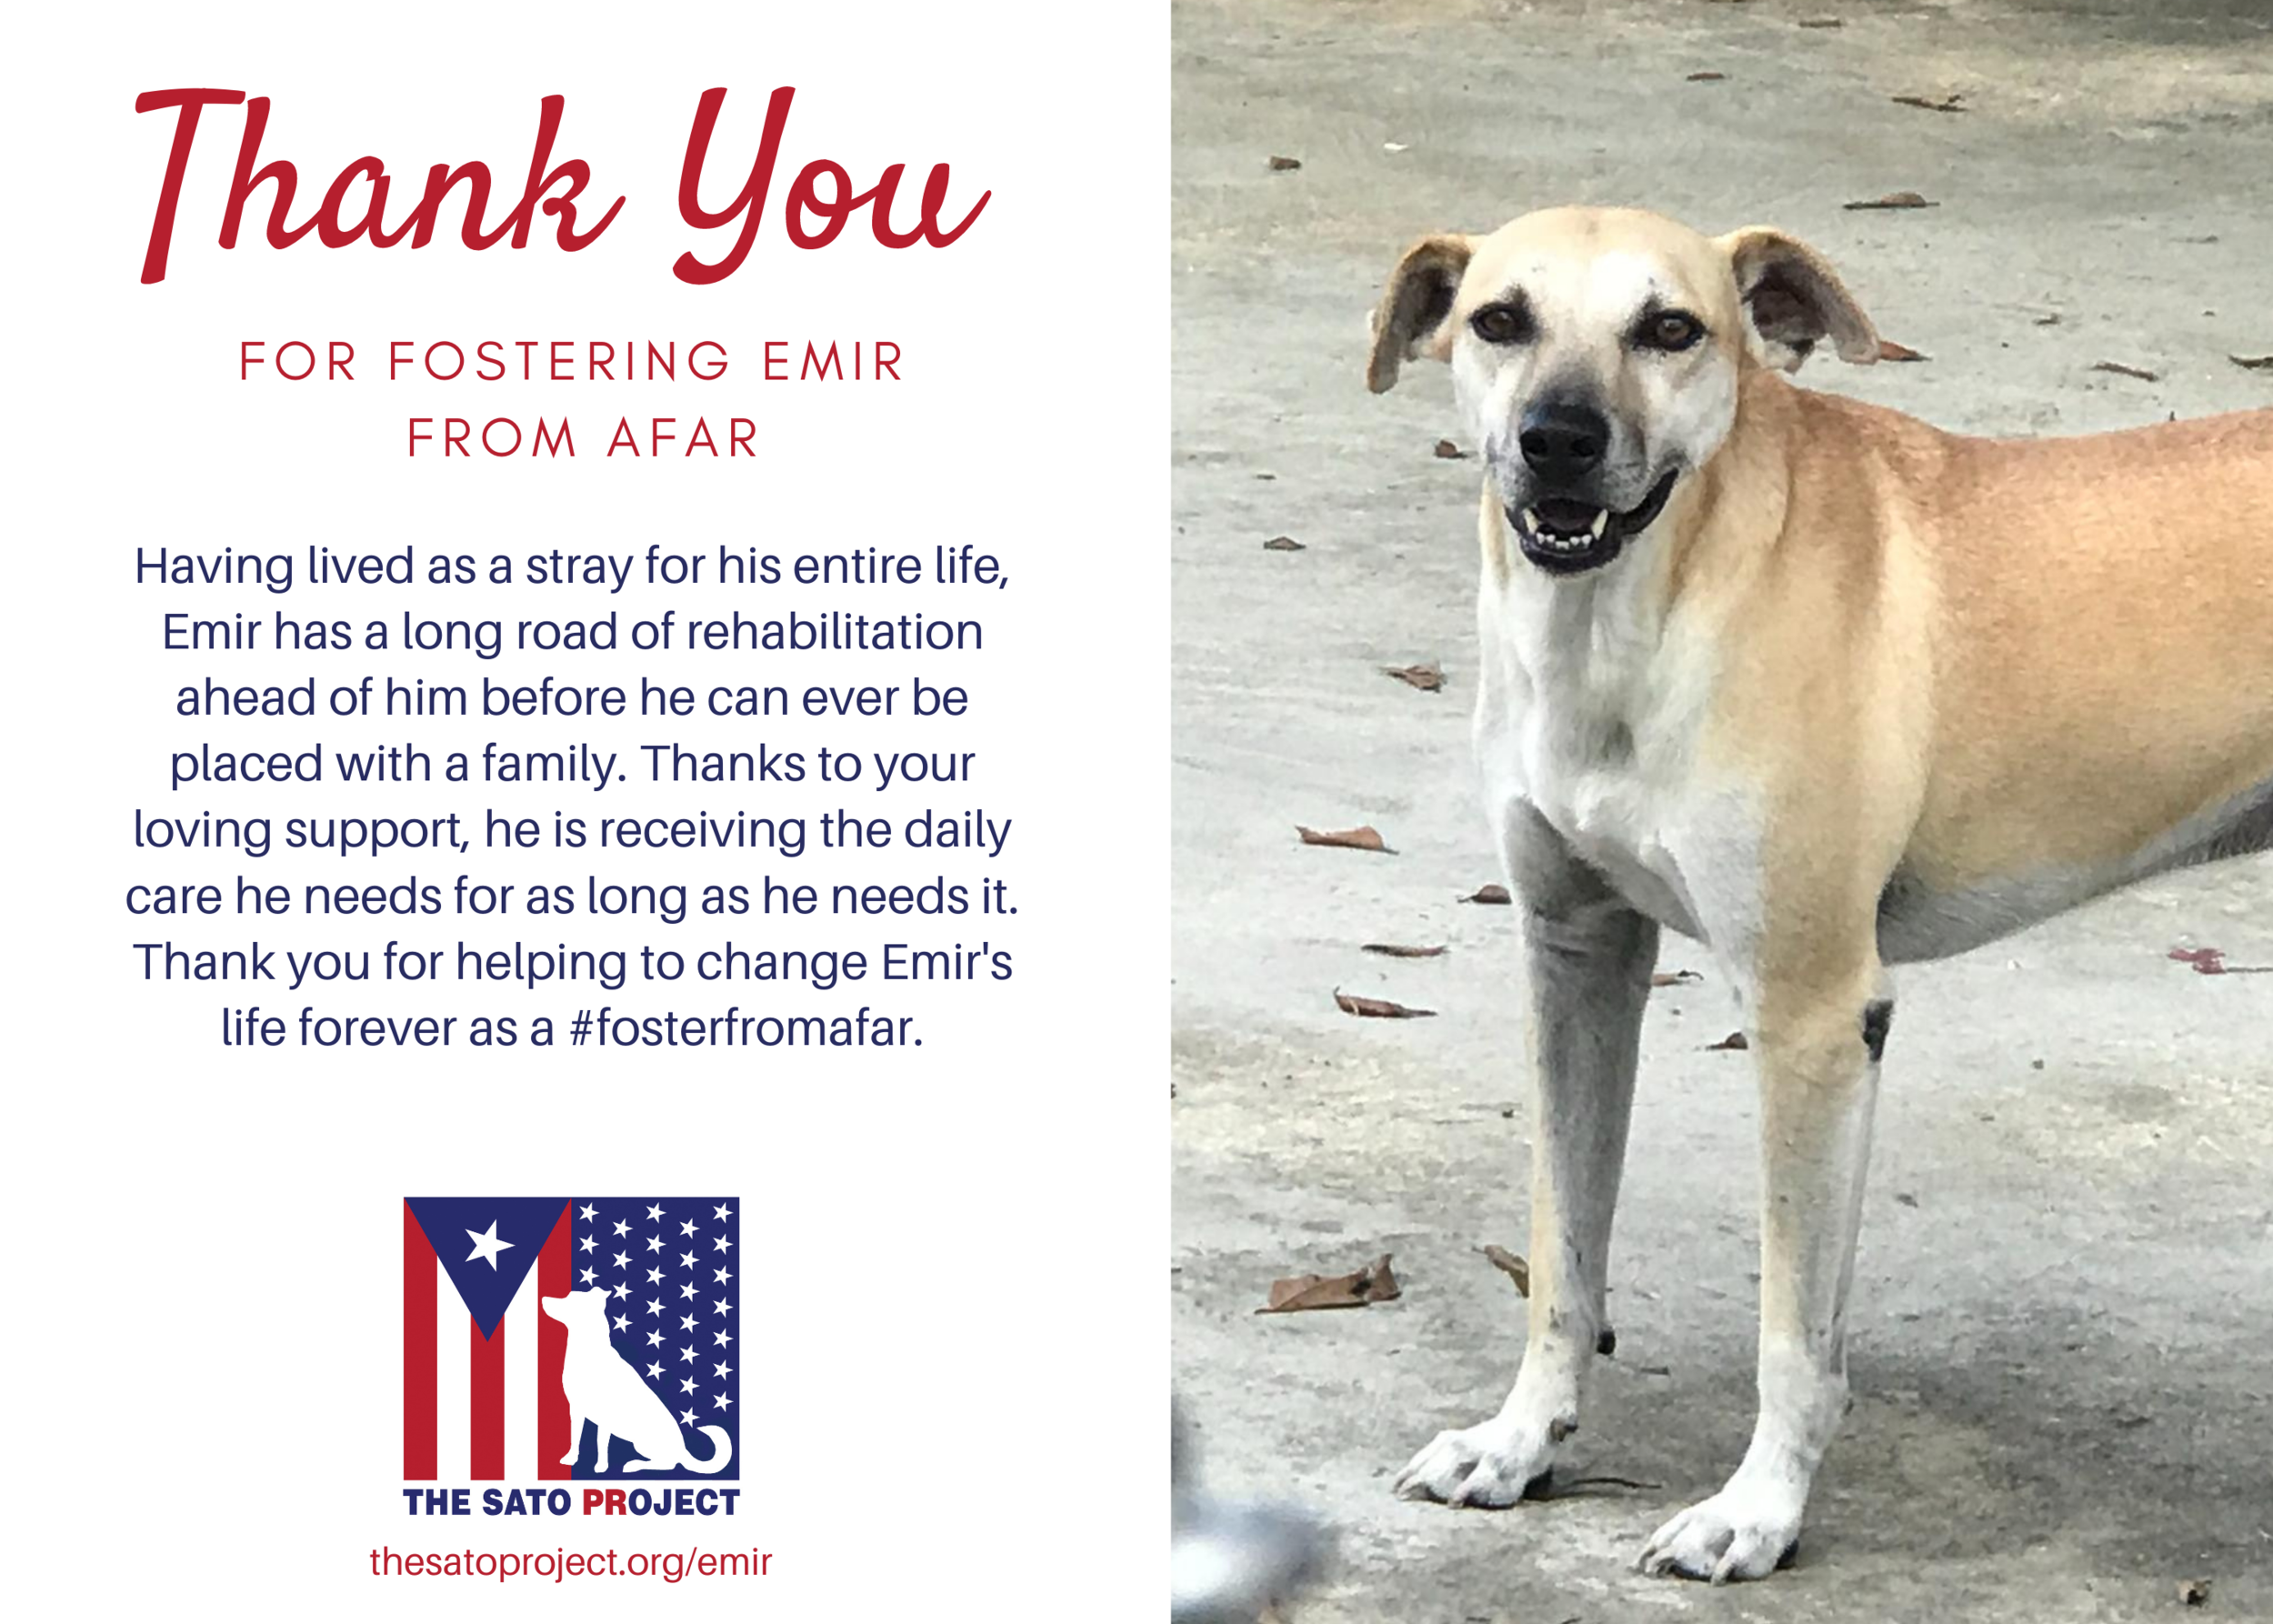 You'll receive this digital postcard to save or print to think of your foster dog every day. 